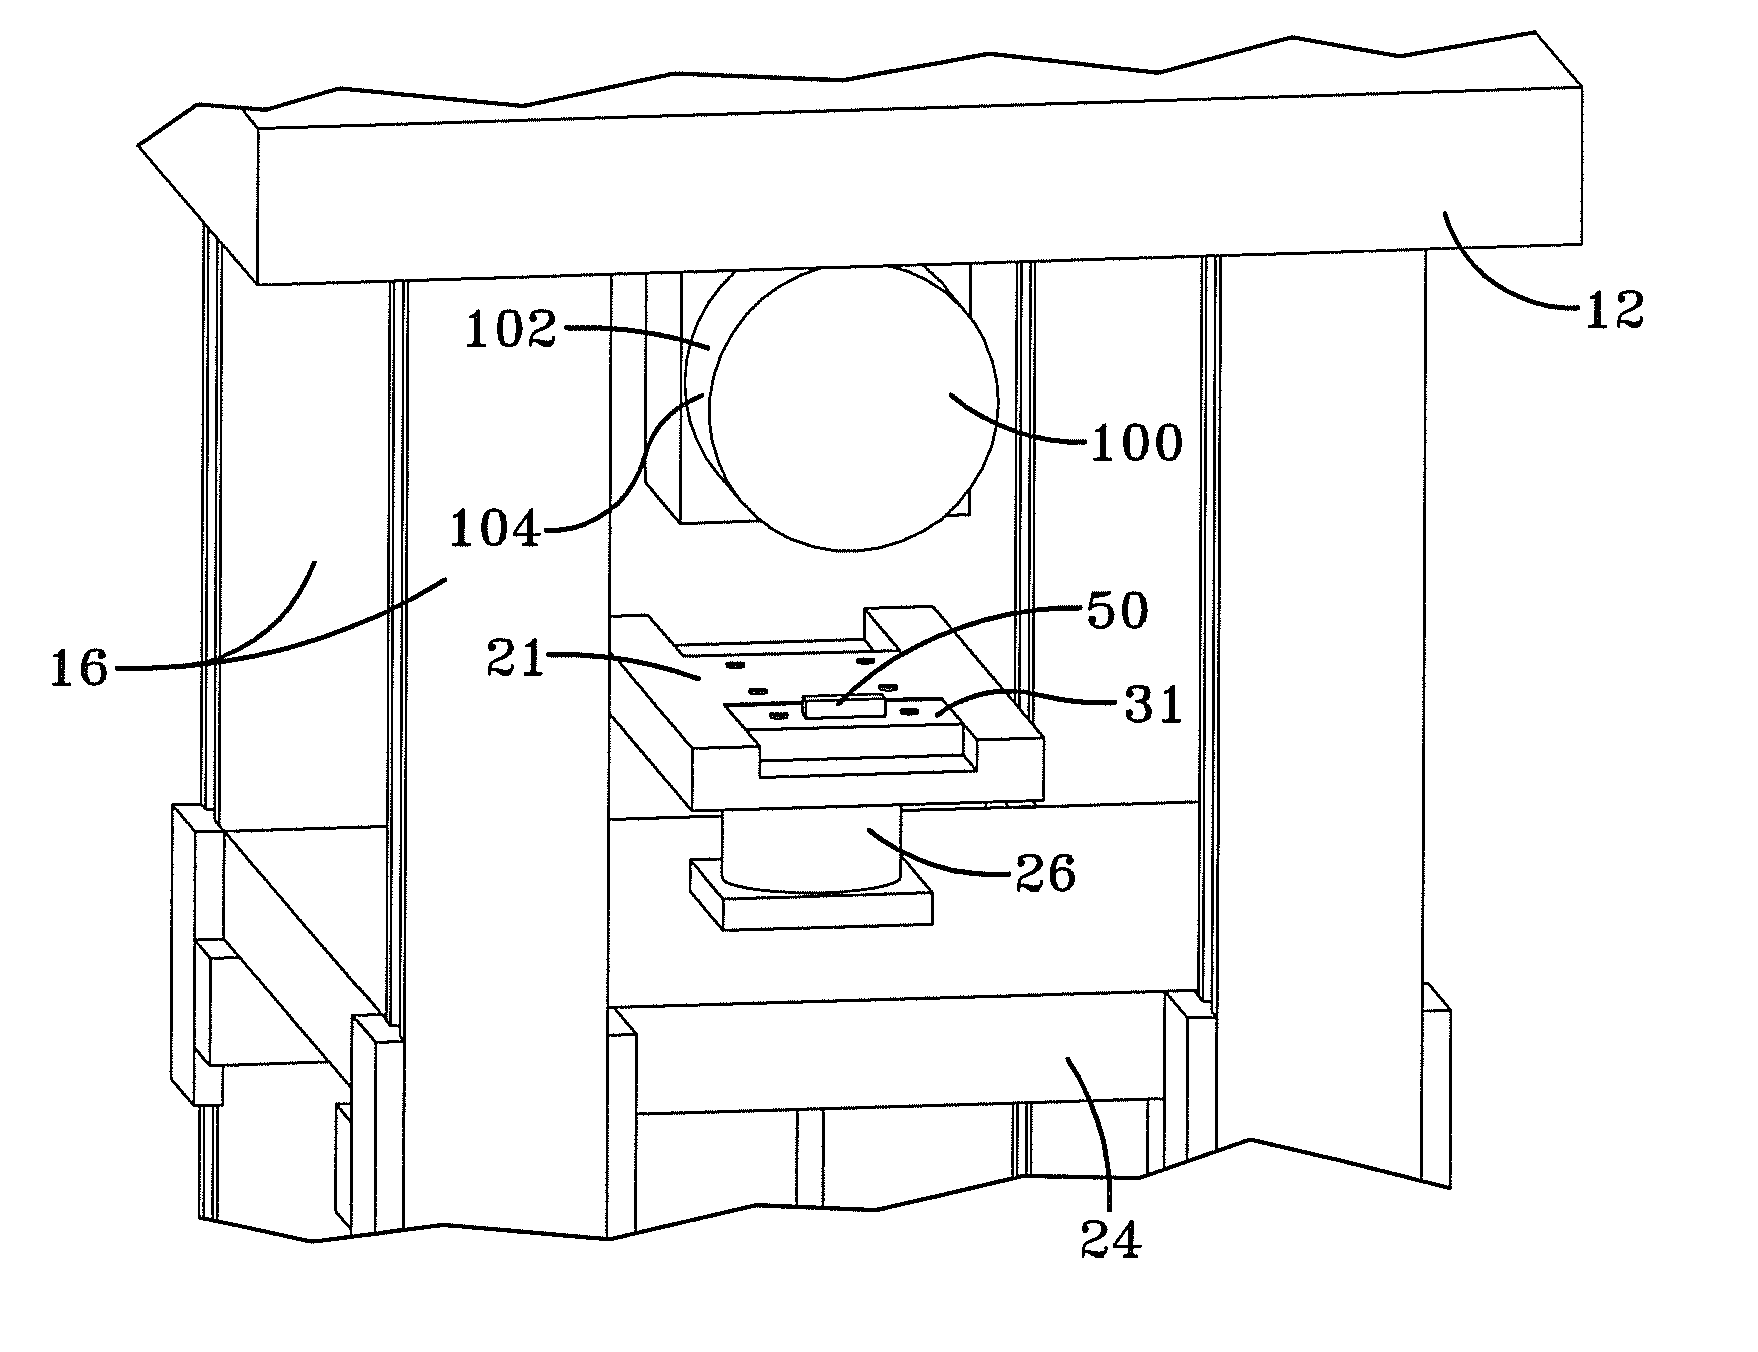 Method and apparatus for determining coefficient of friction